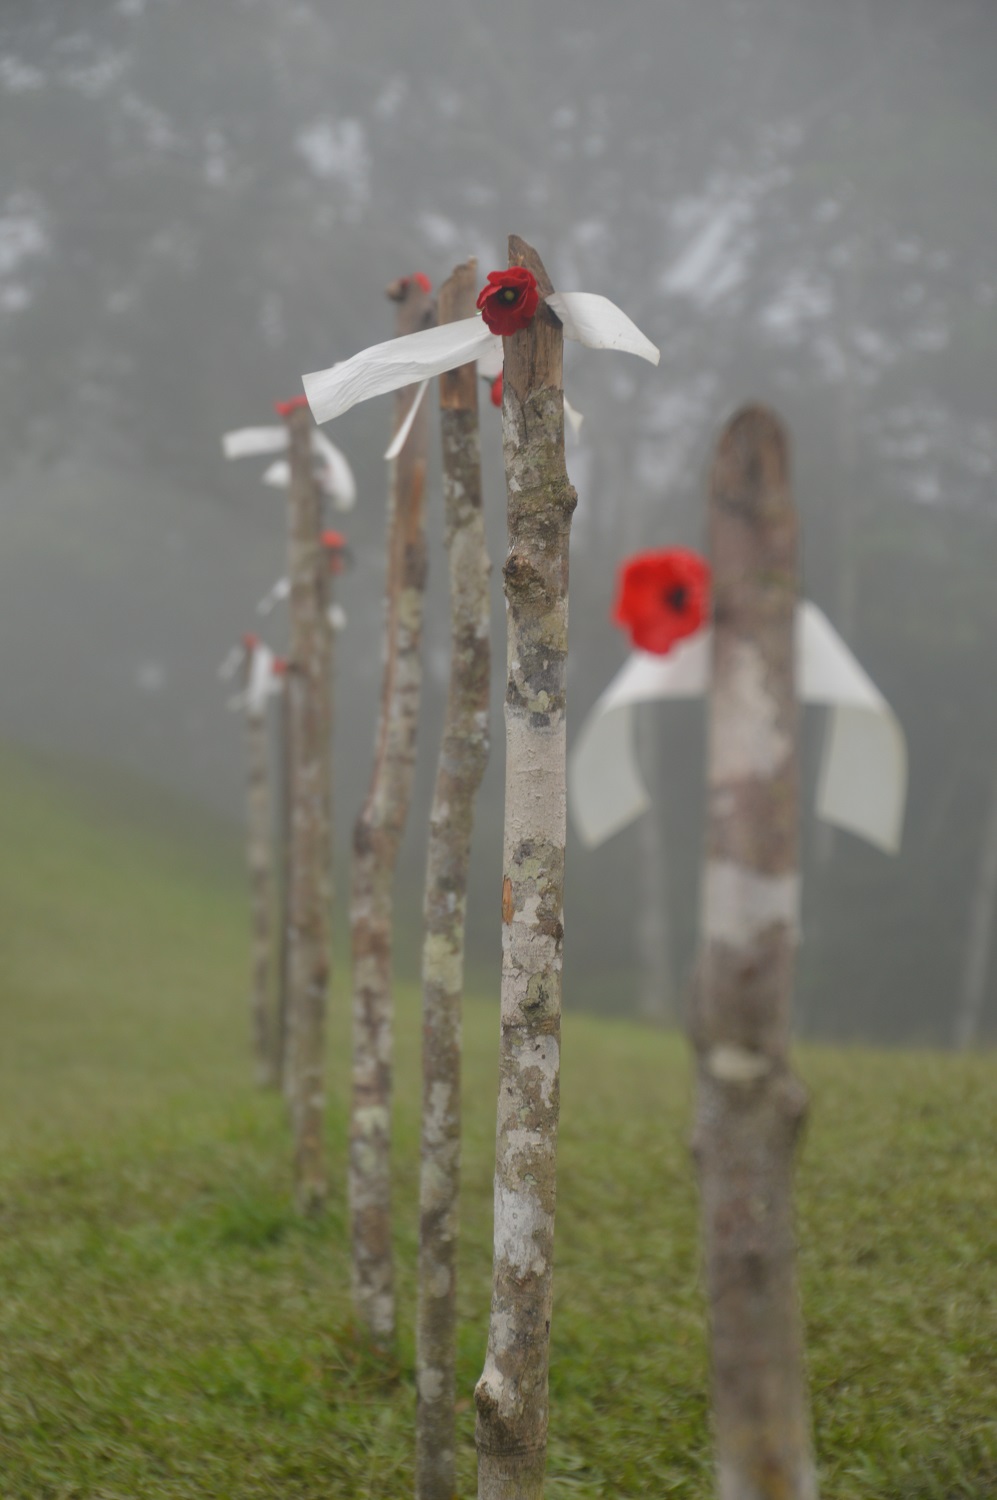 Acknowledge The Importance Of The Kokoda History & What It Signifies